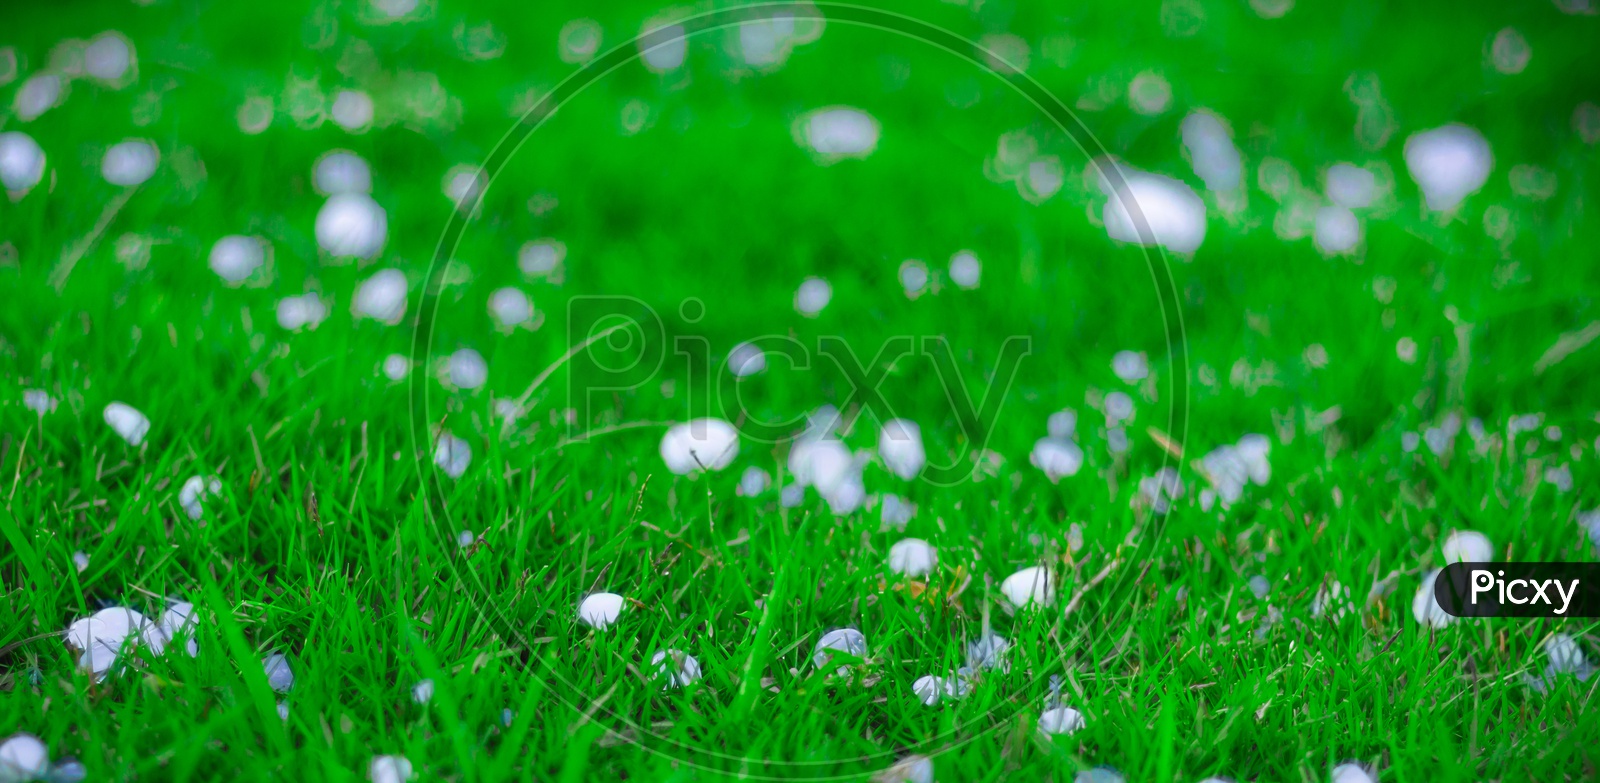 Flakes And Balls Of Ice Crystals On Green Grass After A Hail Storm Appearing Scenic In A Shallow Depth Of Field Landscape Image